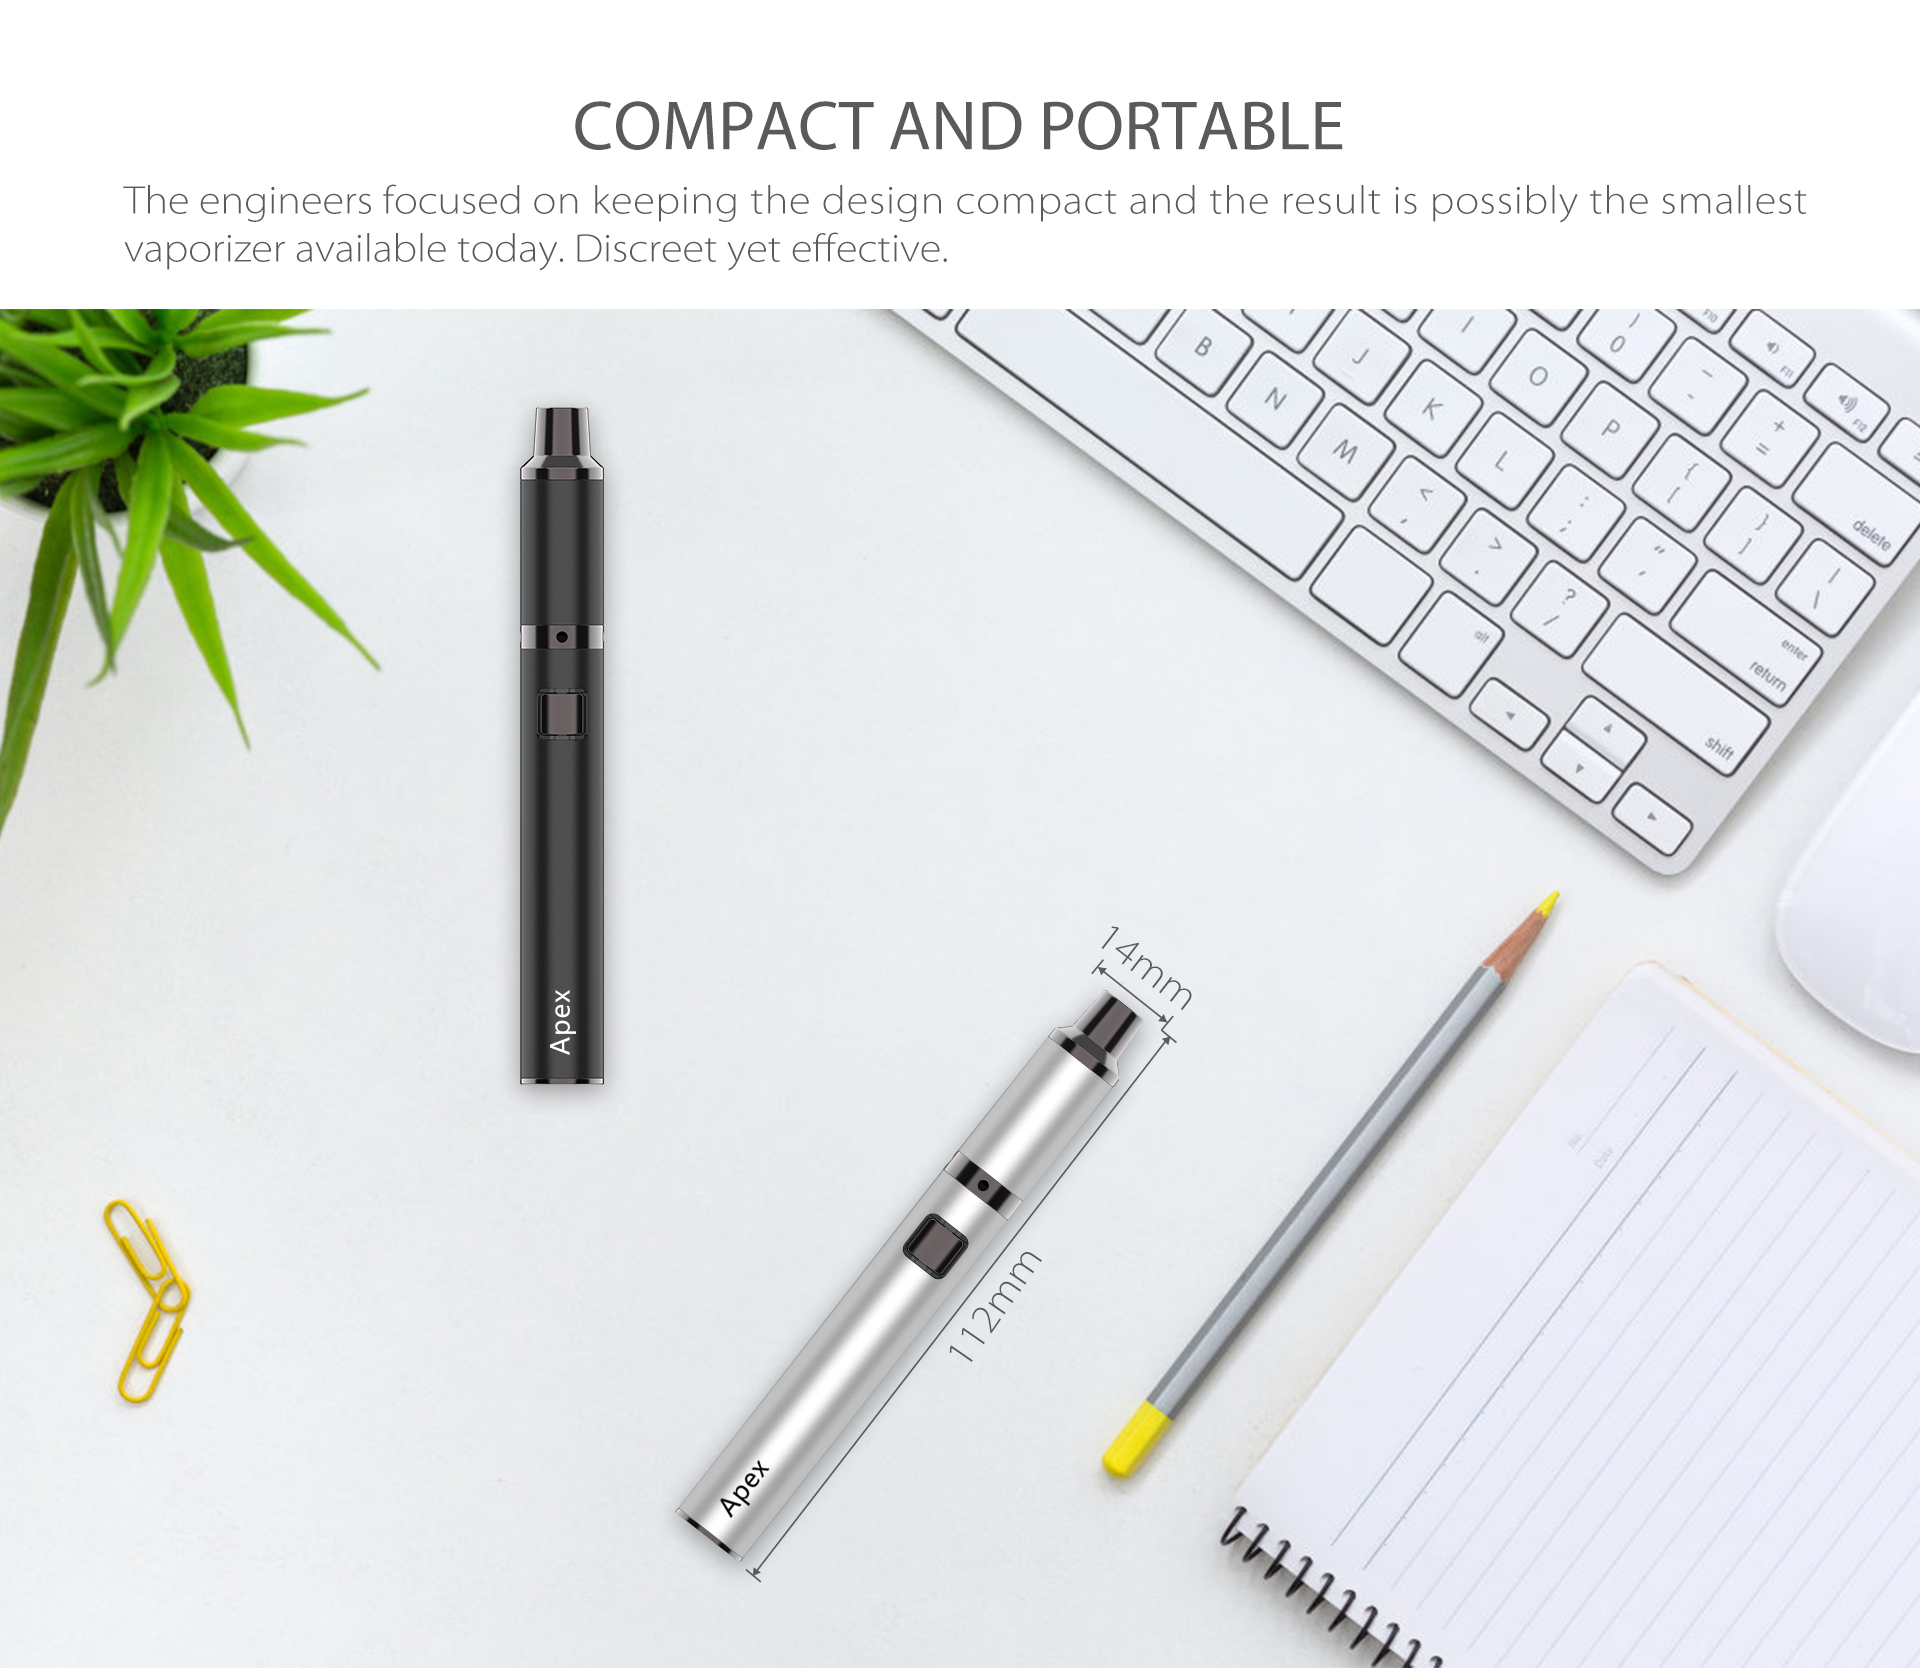 Yocan Apex concentrate vaporizer pen is compact, discreet yet effective.